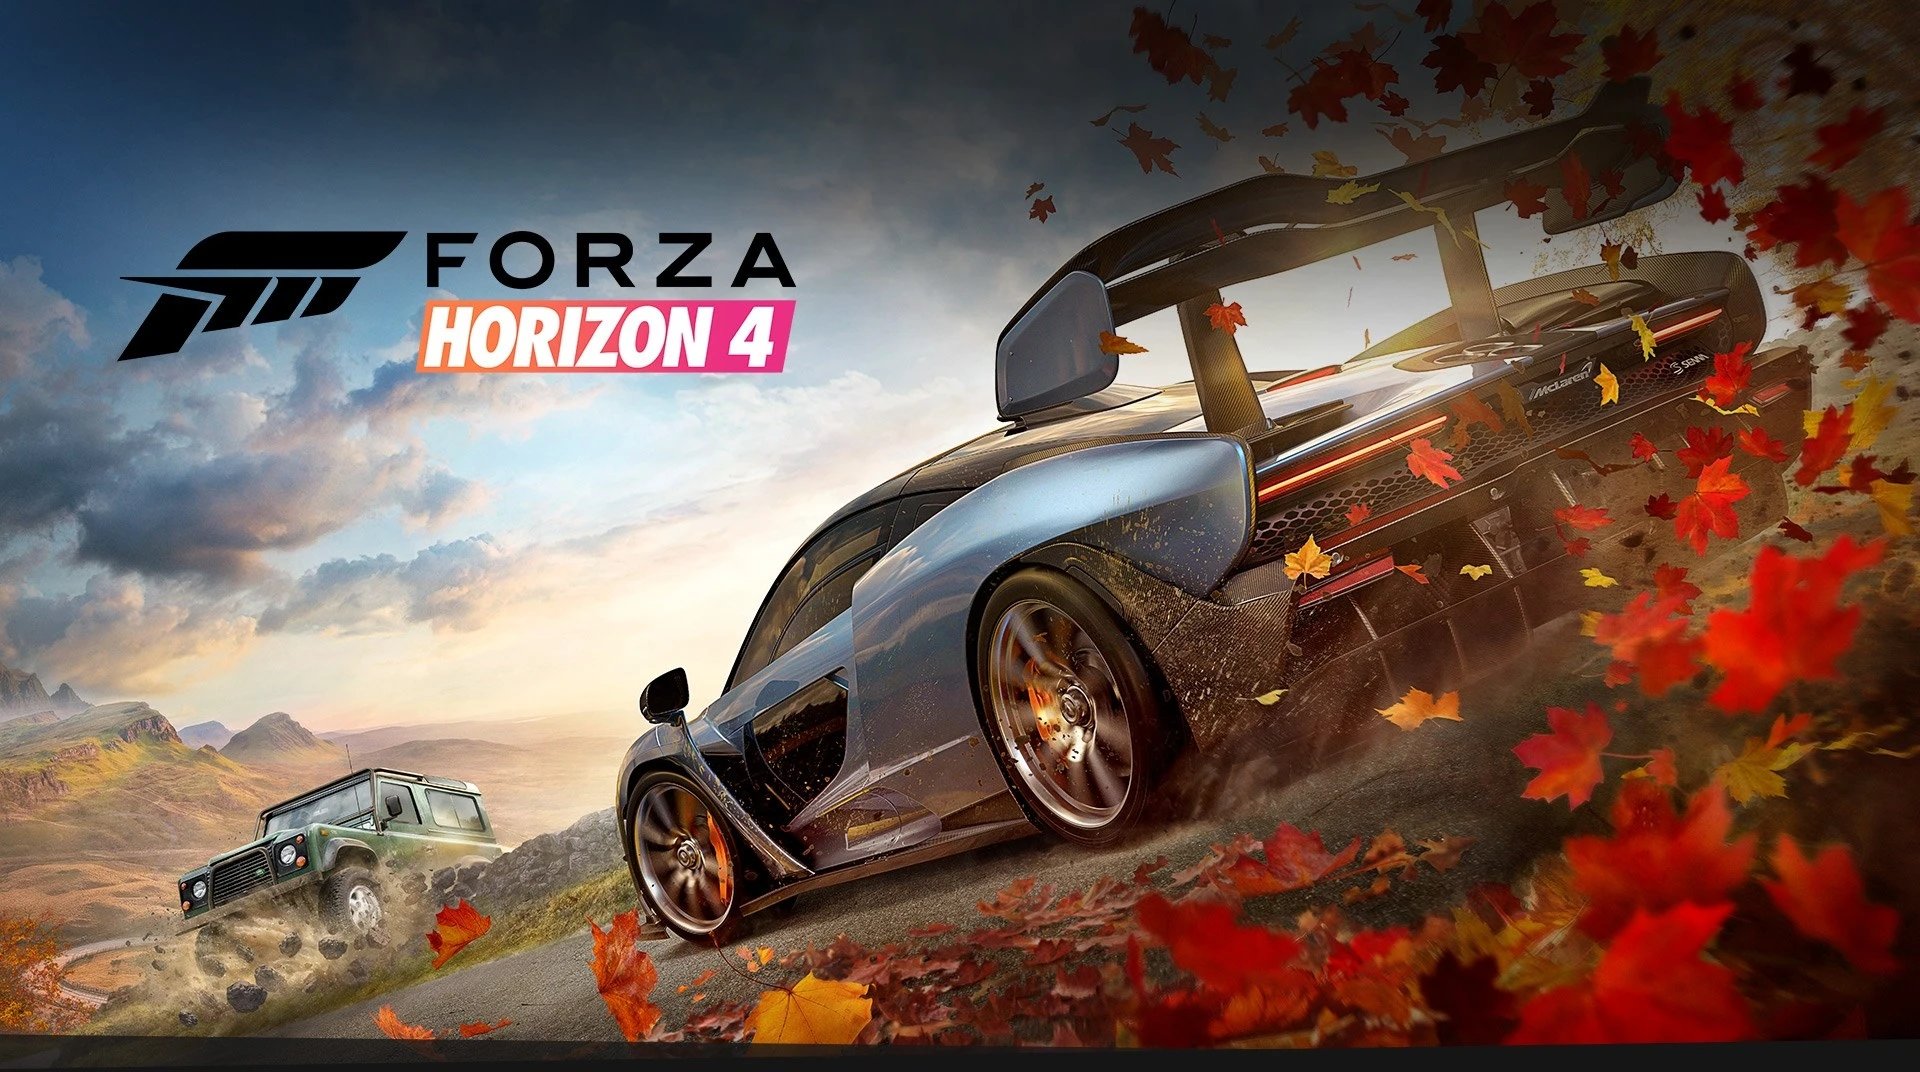 

FORZA HORIZON 4 Ultimate + ALL DLC + FH3U, AUTOMATED ACTIVATION